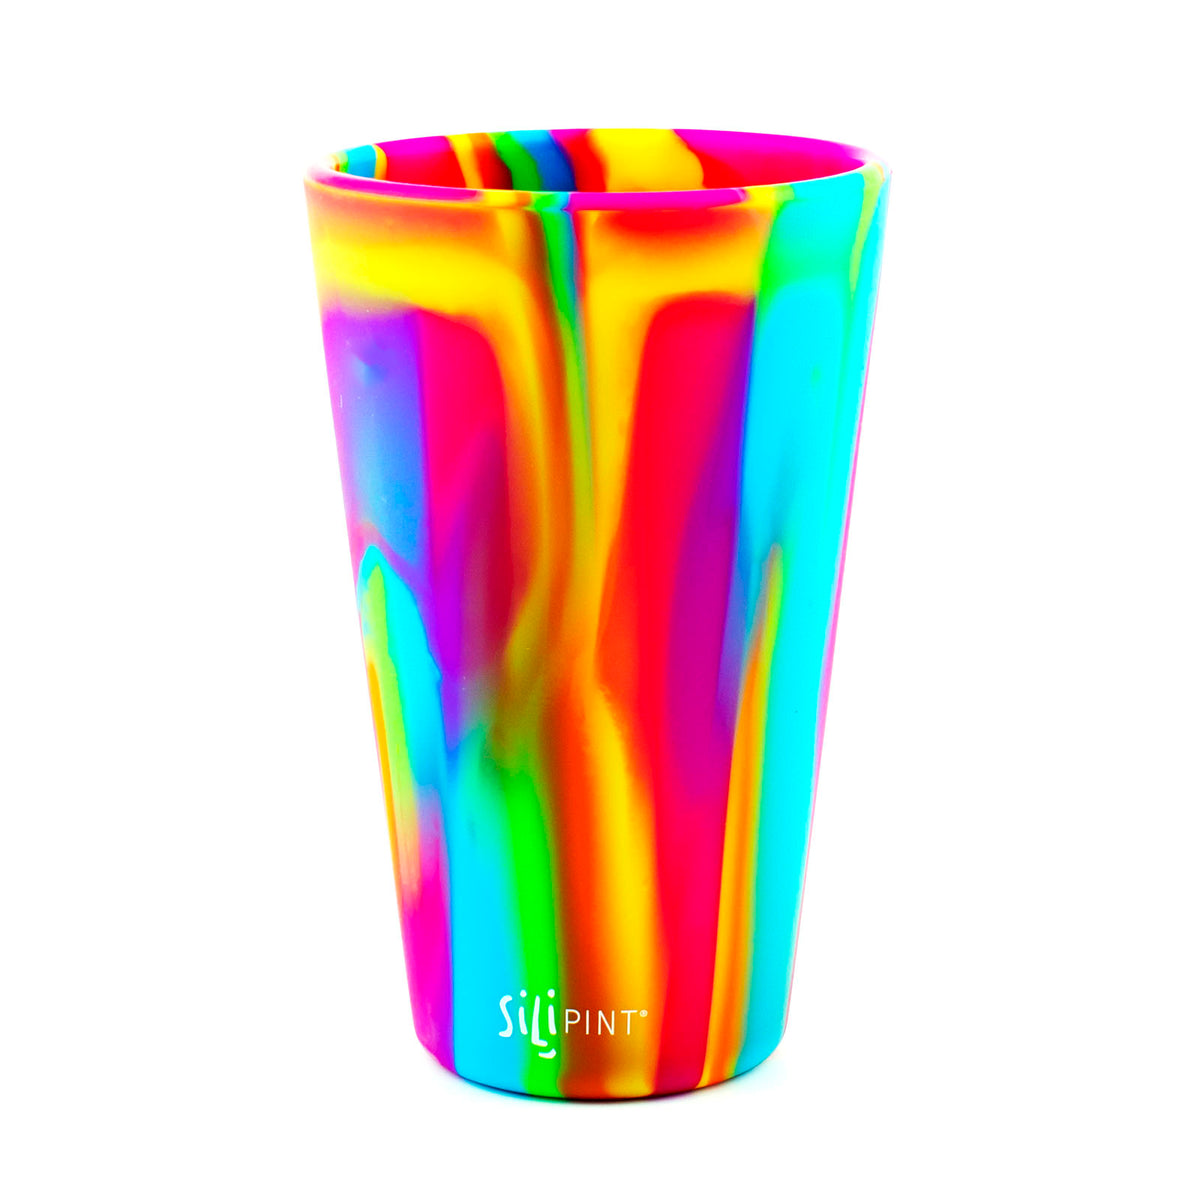 Silipint Silicone Pint Glasses: 6 Pack - 16 oz., Multicolor